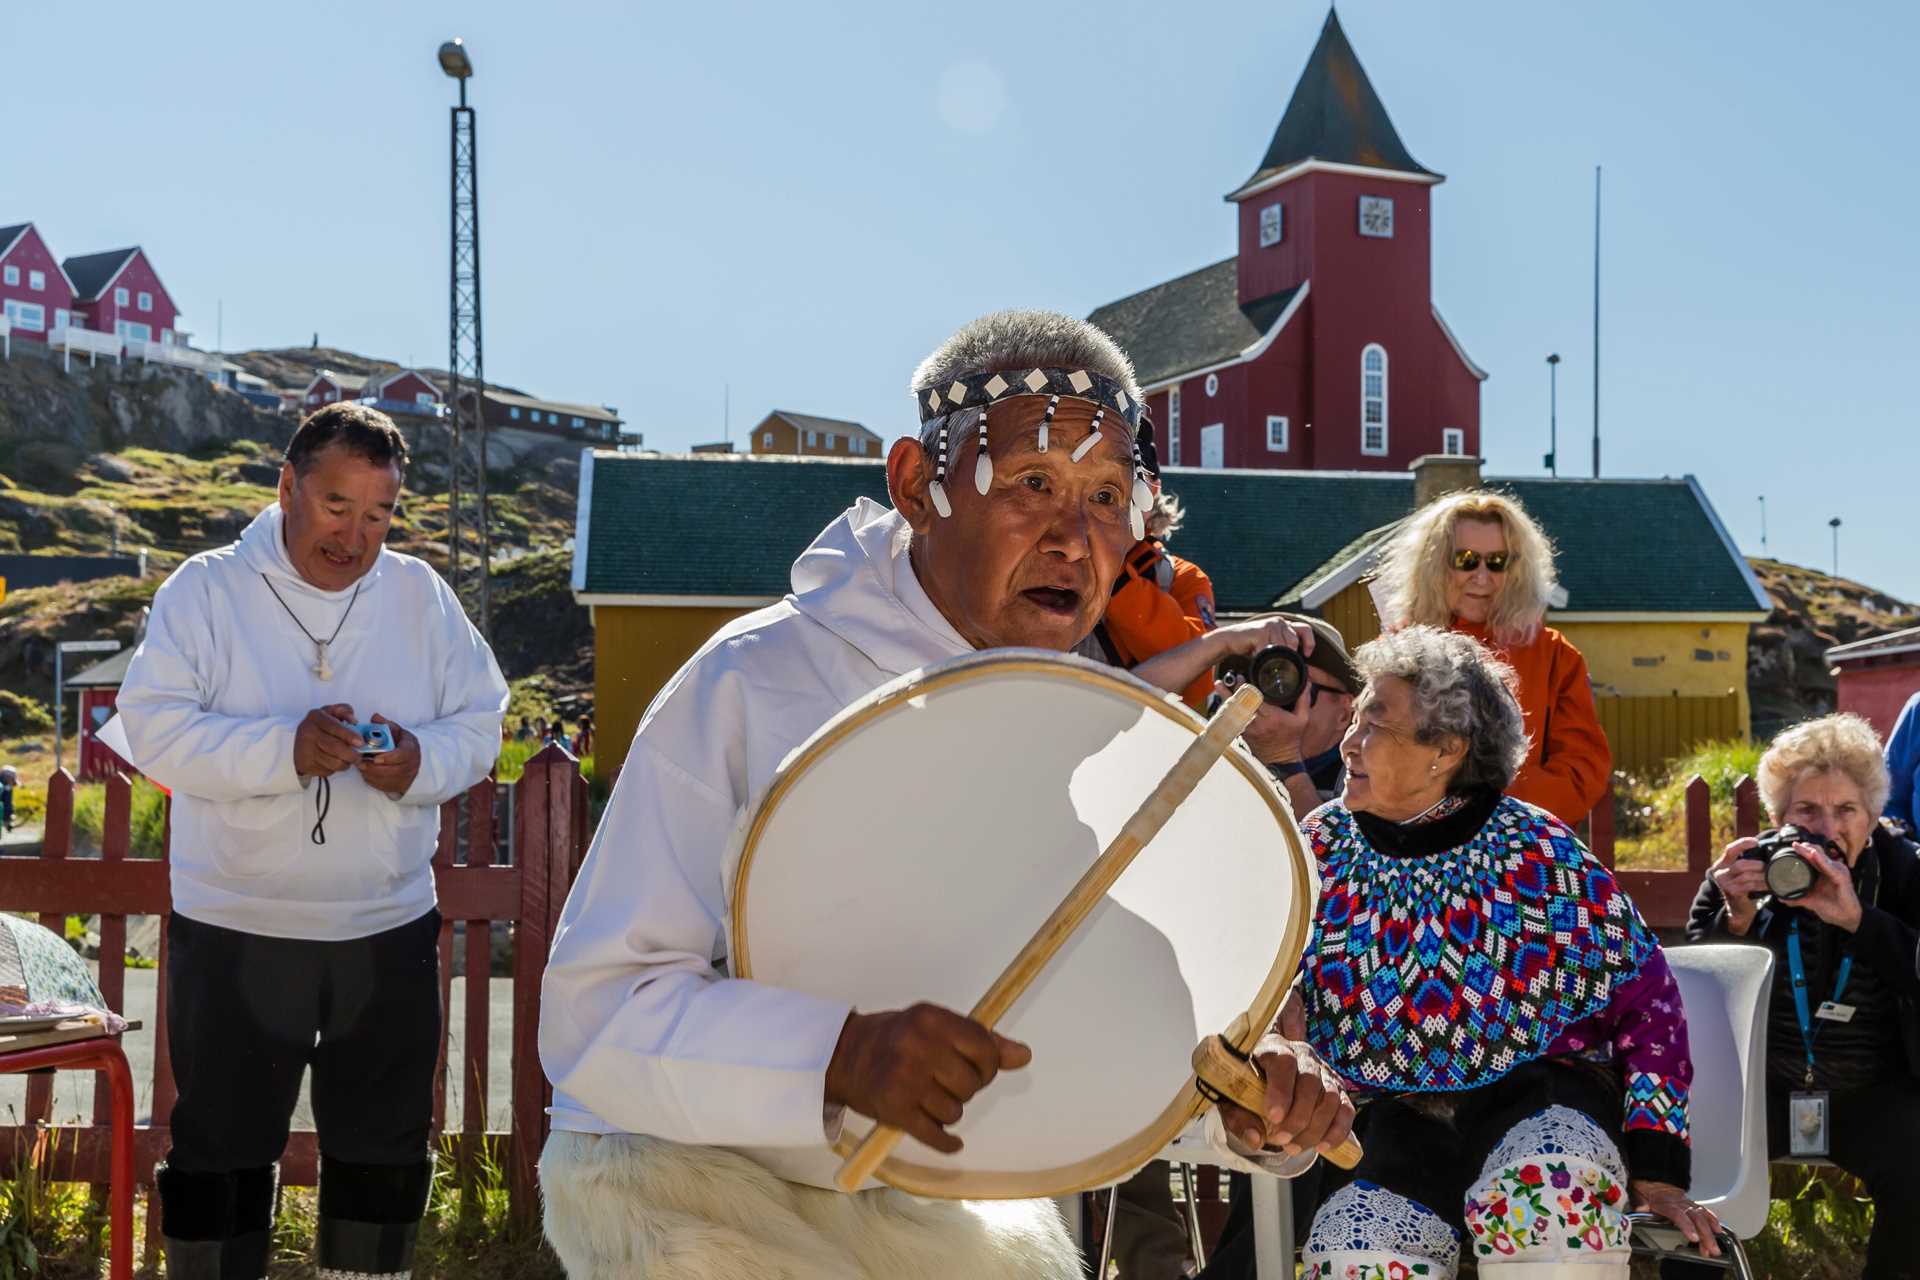 An Inuit dancer performs in Sisimiut, Greenland